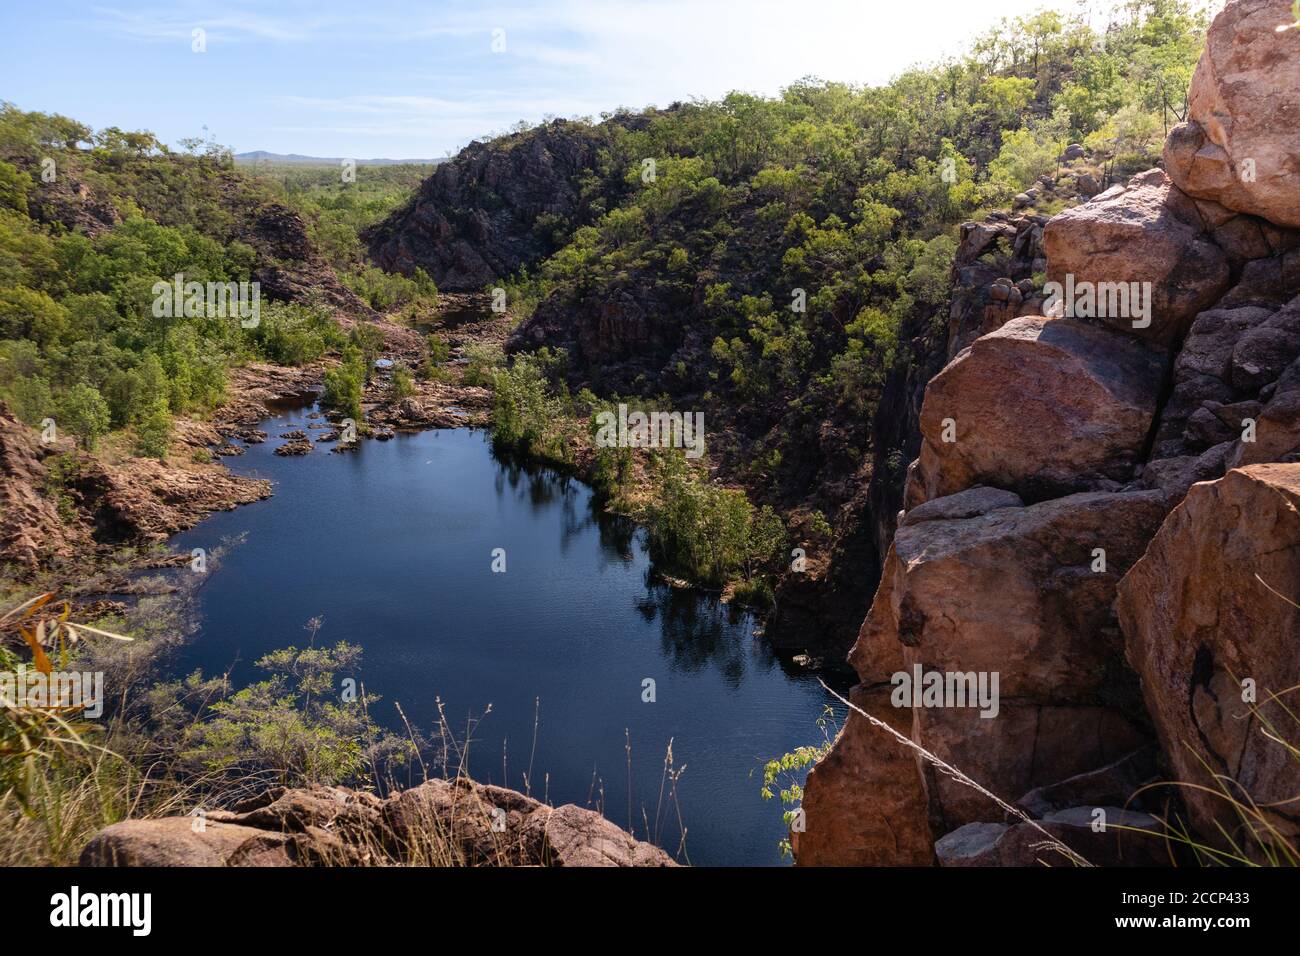 Water pond on the way to the Upper Pool and cascades. Surroundings of Edith falls, Nitmiluk national park, Northern Territory NT, Australia Stock Photo